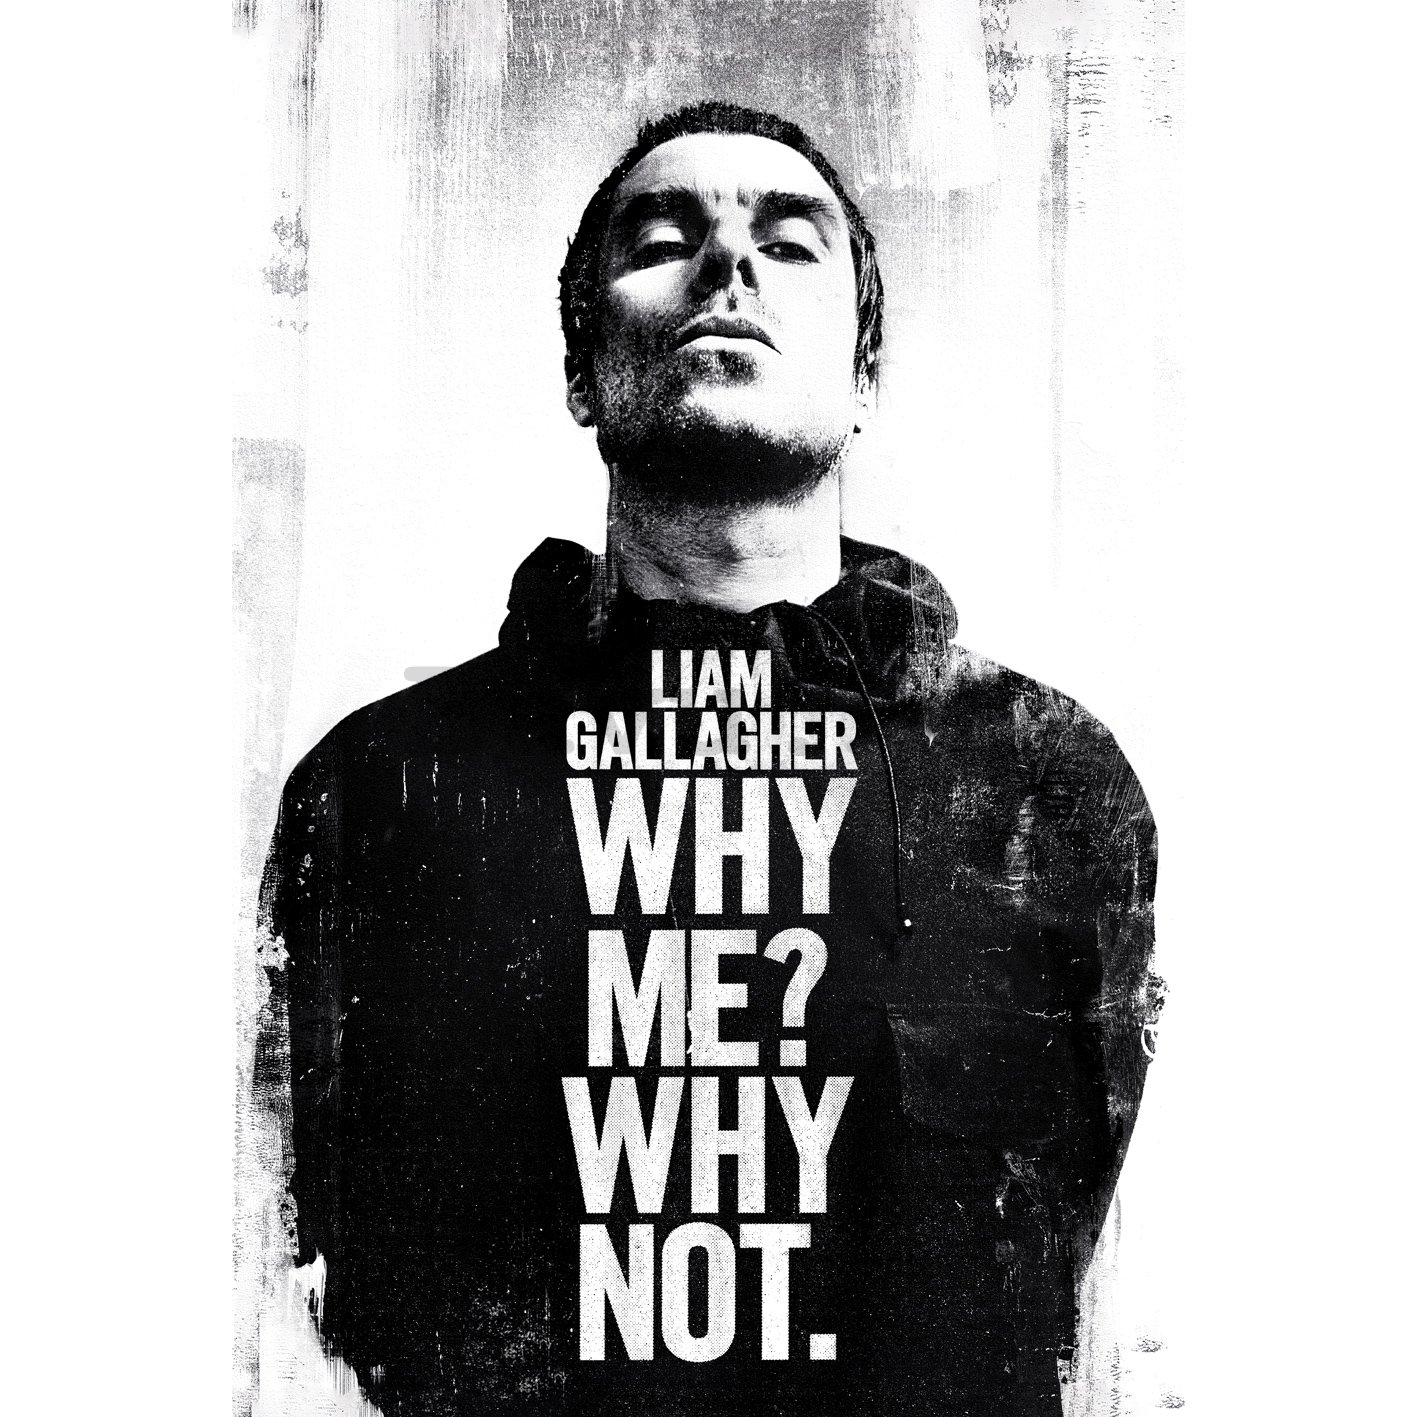 Plakát - Liam Gallagher (Why me why not)